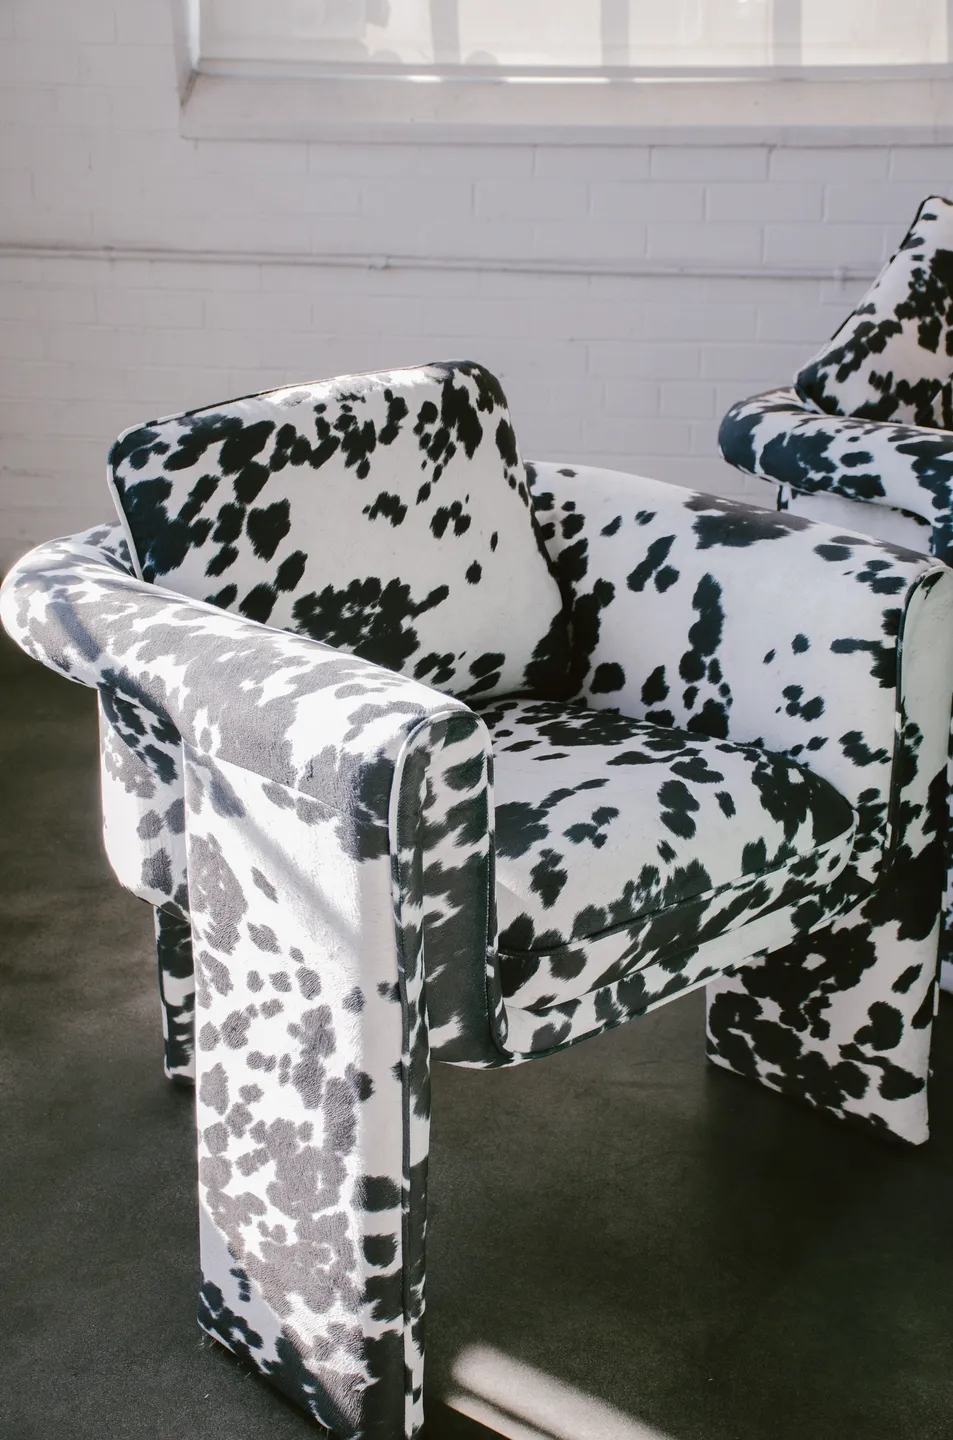 A chair with black and white cow print upholstery prepared for an event in a white-walled room.